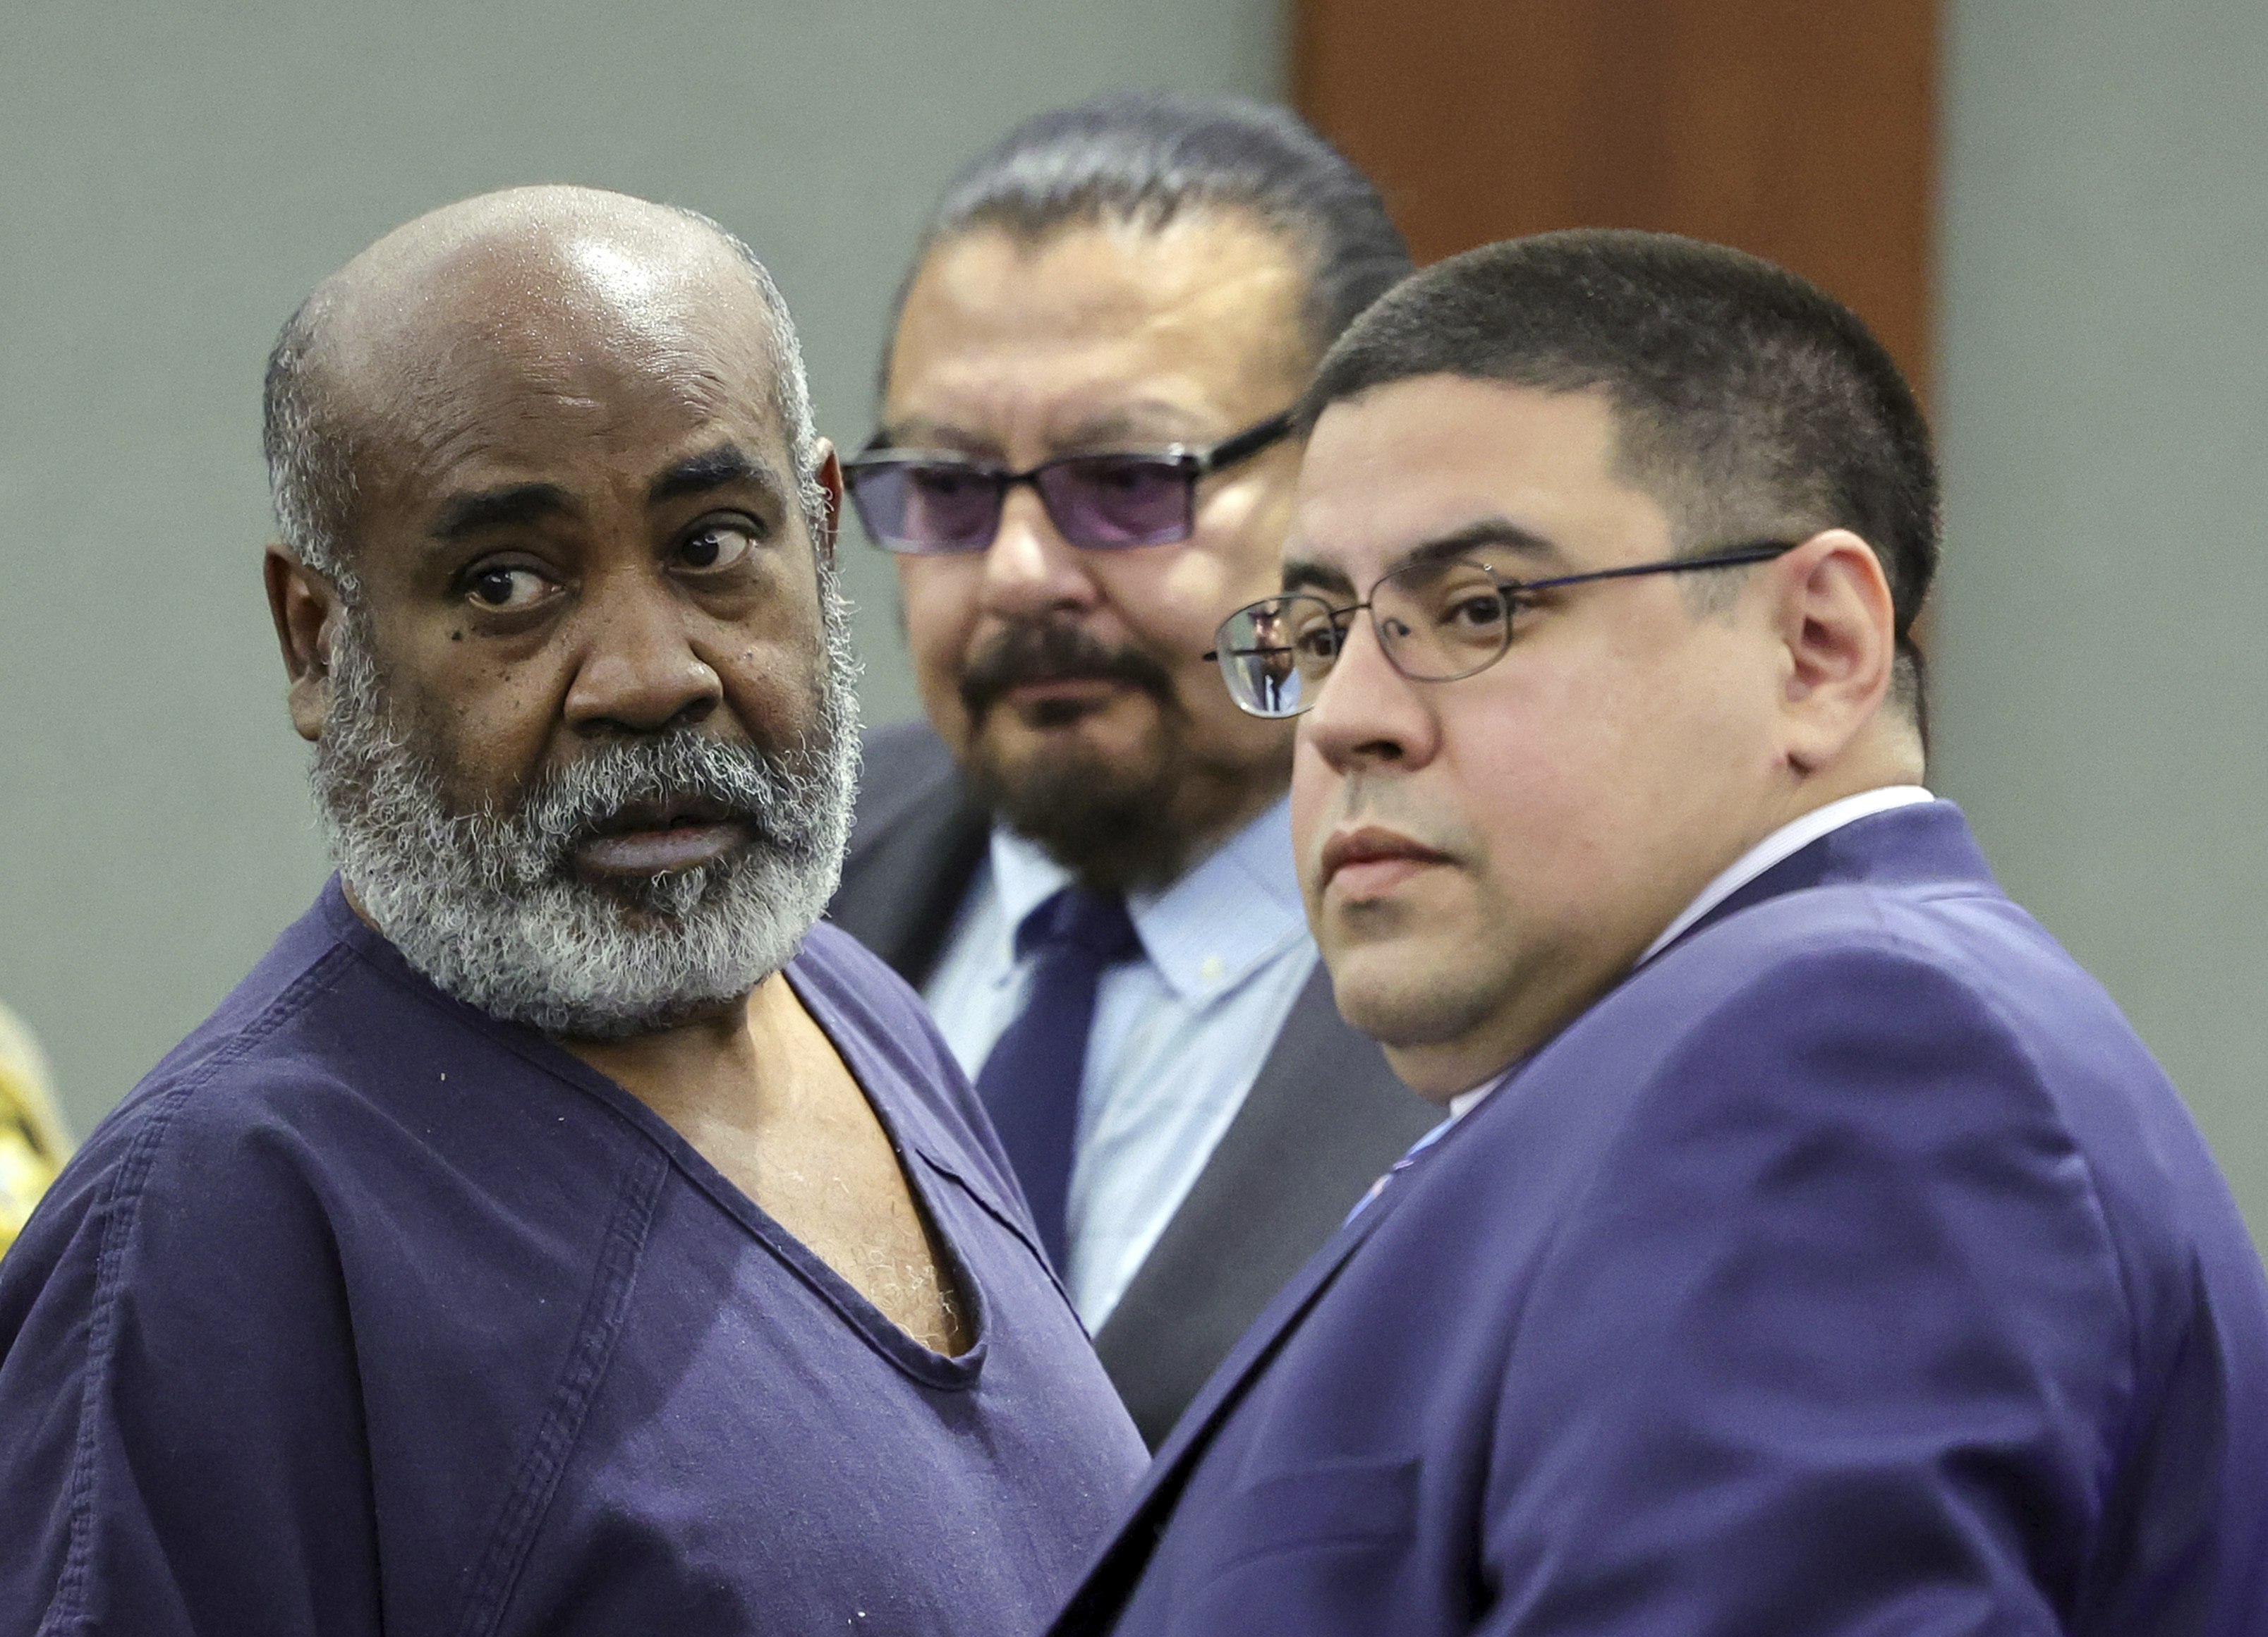 Ex-gang leader makes his bid in Las Vegas court for house arrest before trial in Tupac Shakur case